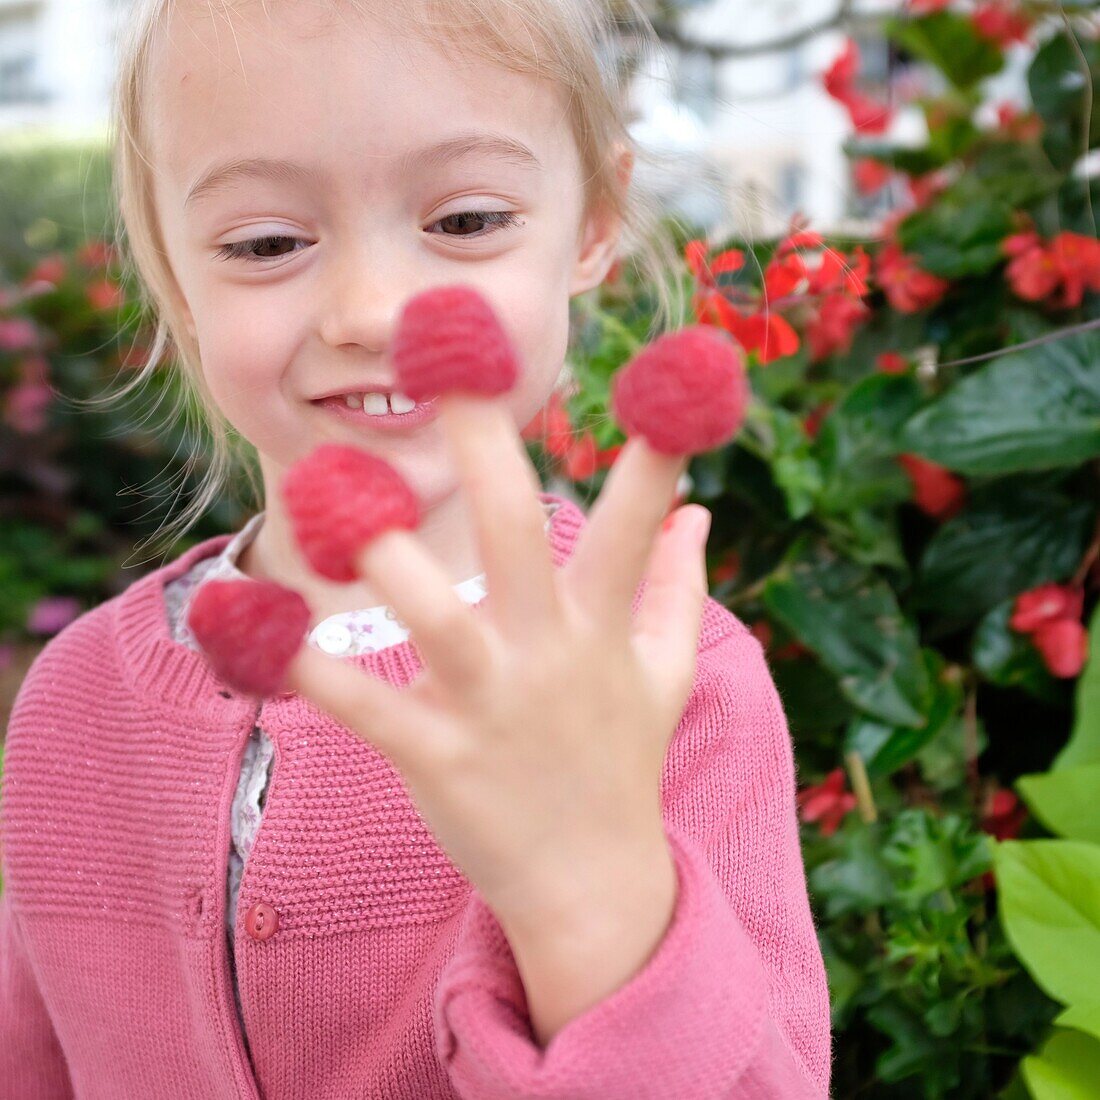 France, Val de Marne, Charenton le Pont, girl playing with raspberries